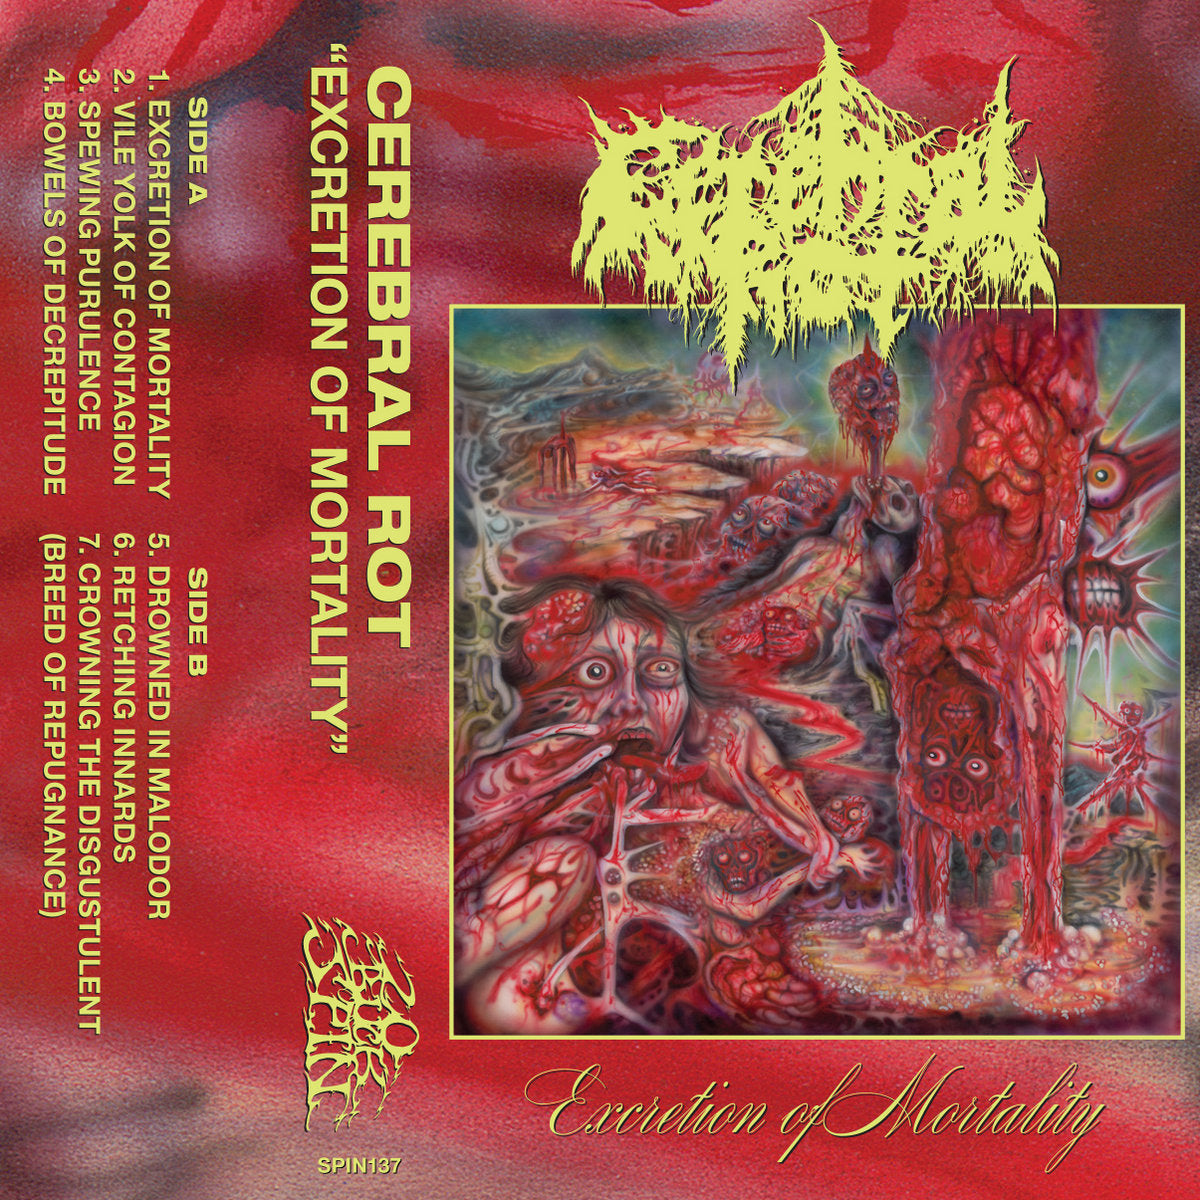 CEREBRAL ROT - Excretion of Mortality - cassette